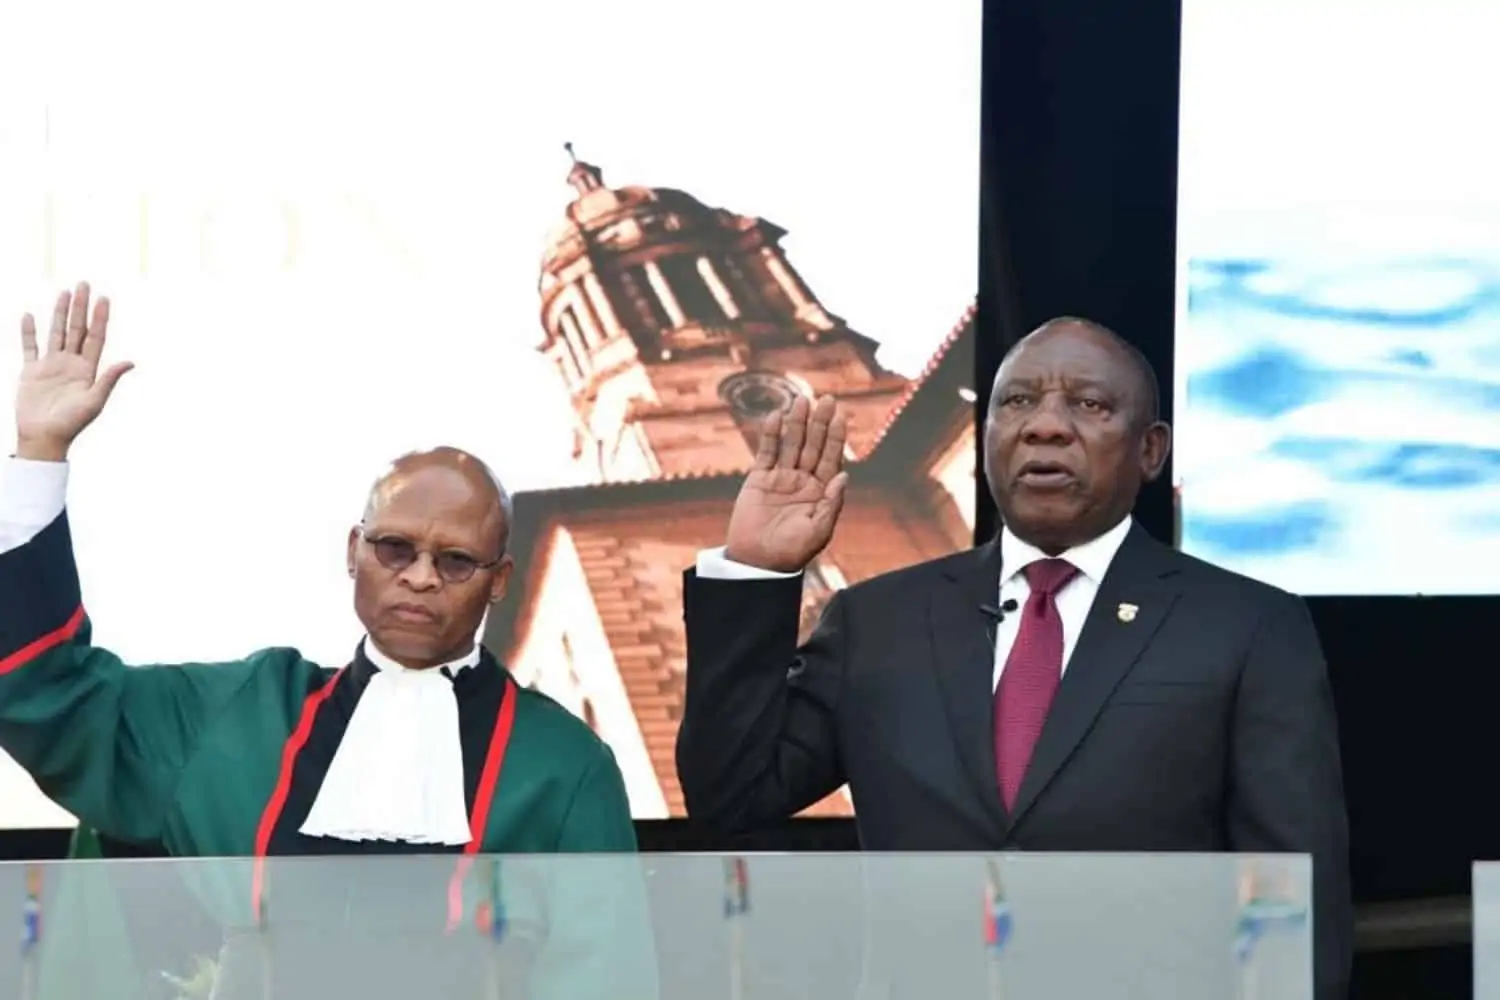 Chief Justice Mogoeng Mogoeng's term comes to an end